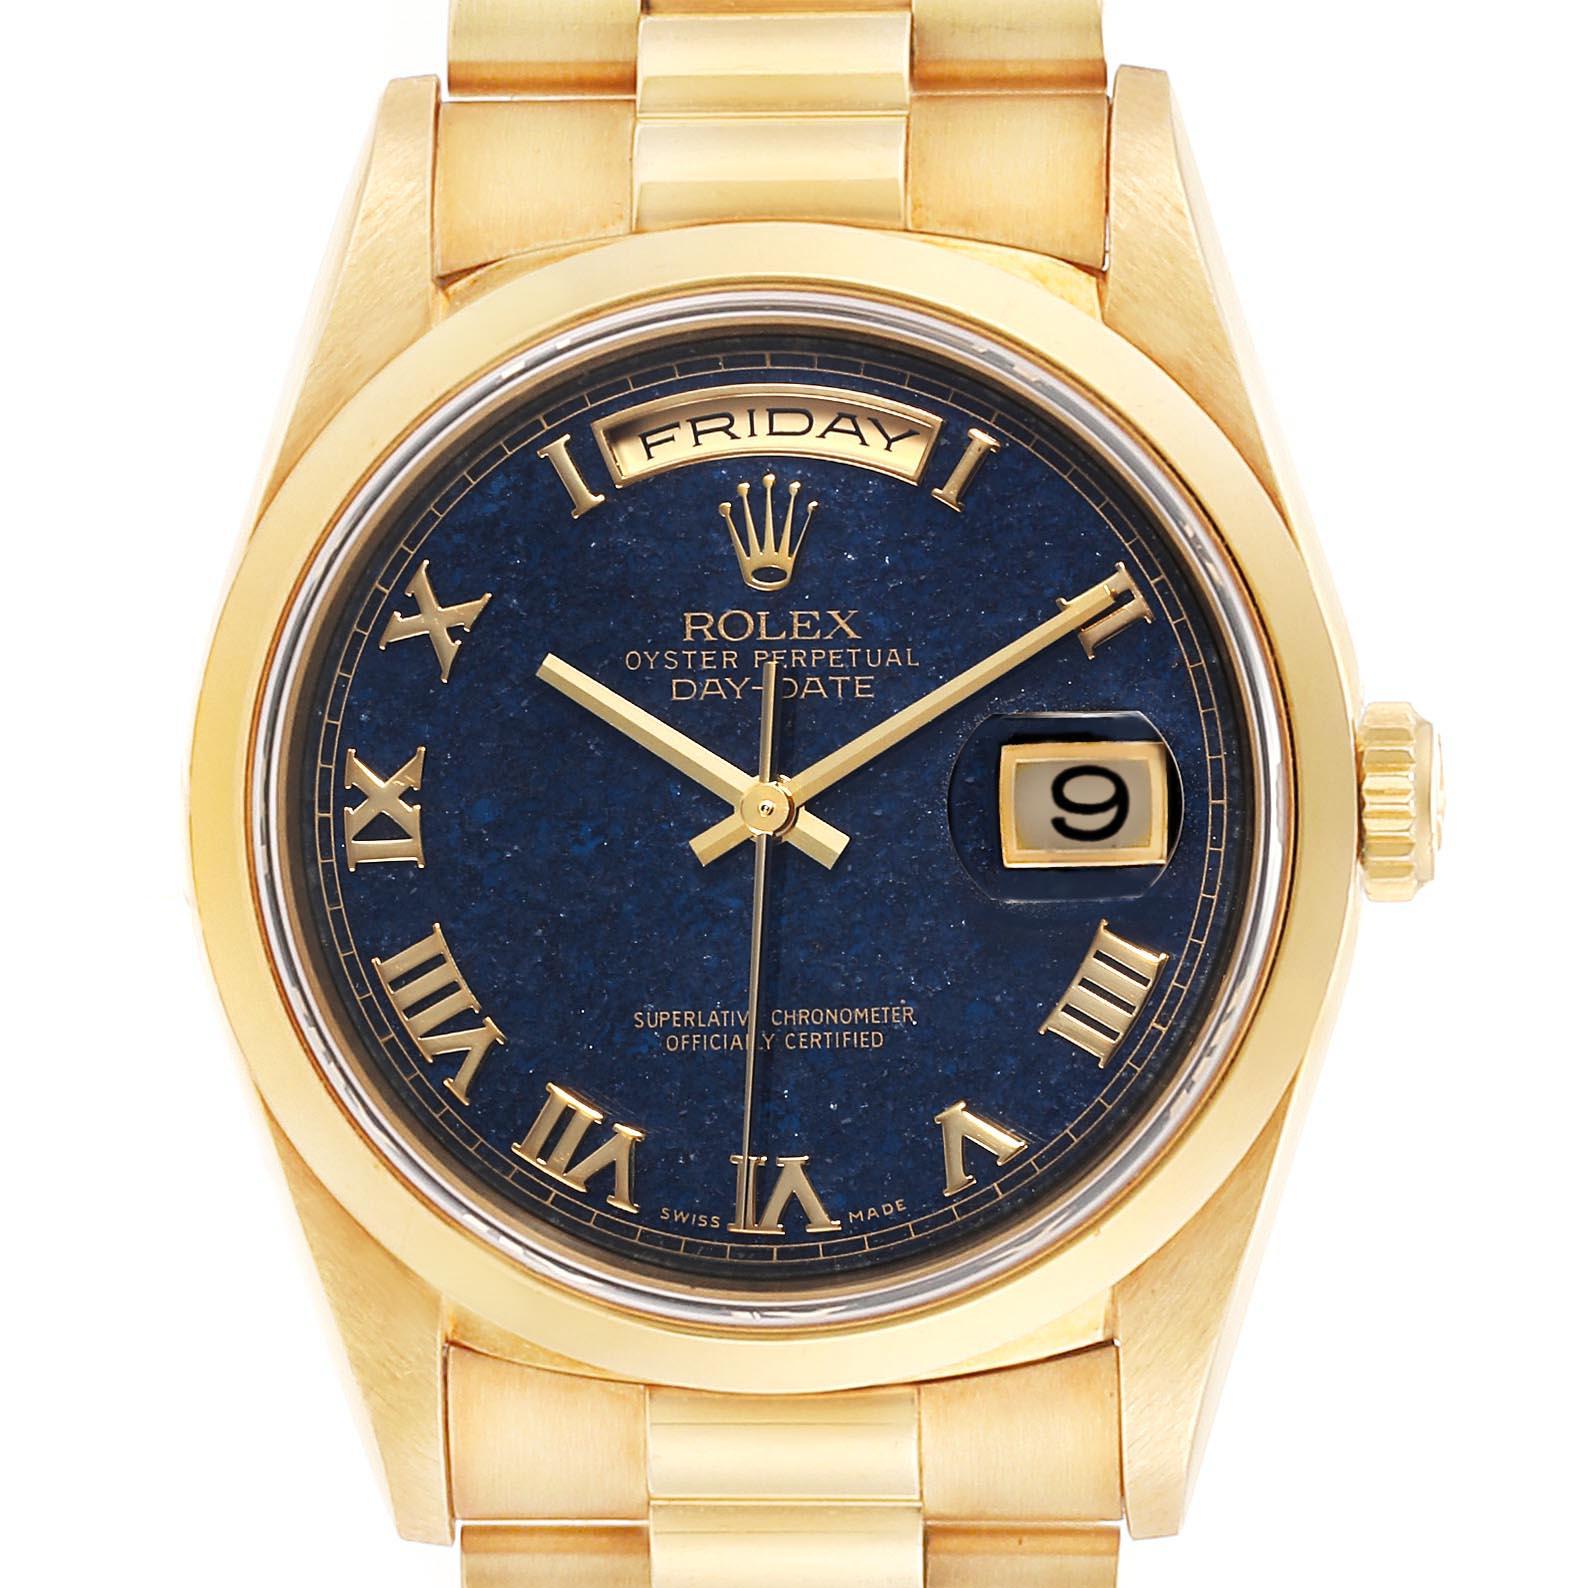 Rolex President Yellow Gold Blue Aventurine Mens Watch 18208 Box Papers. Officially certified chronometer self-winding movement. 18k yellow gold oyster case 36.0 mm in diameter. Rolex logo on a crown. 18K yellow gold fluted bezel. Scratch resistant